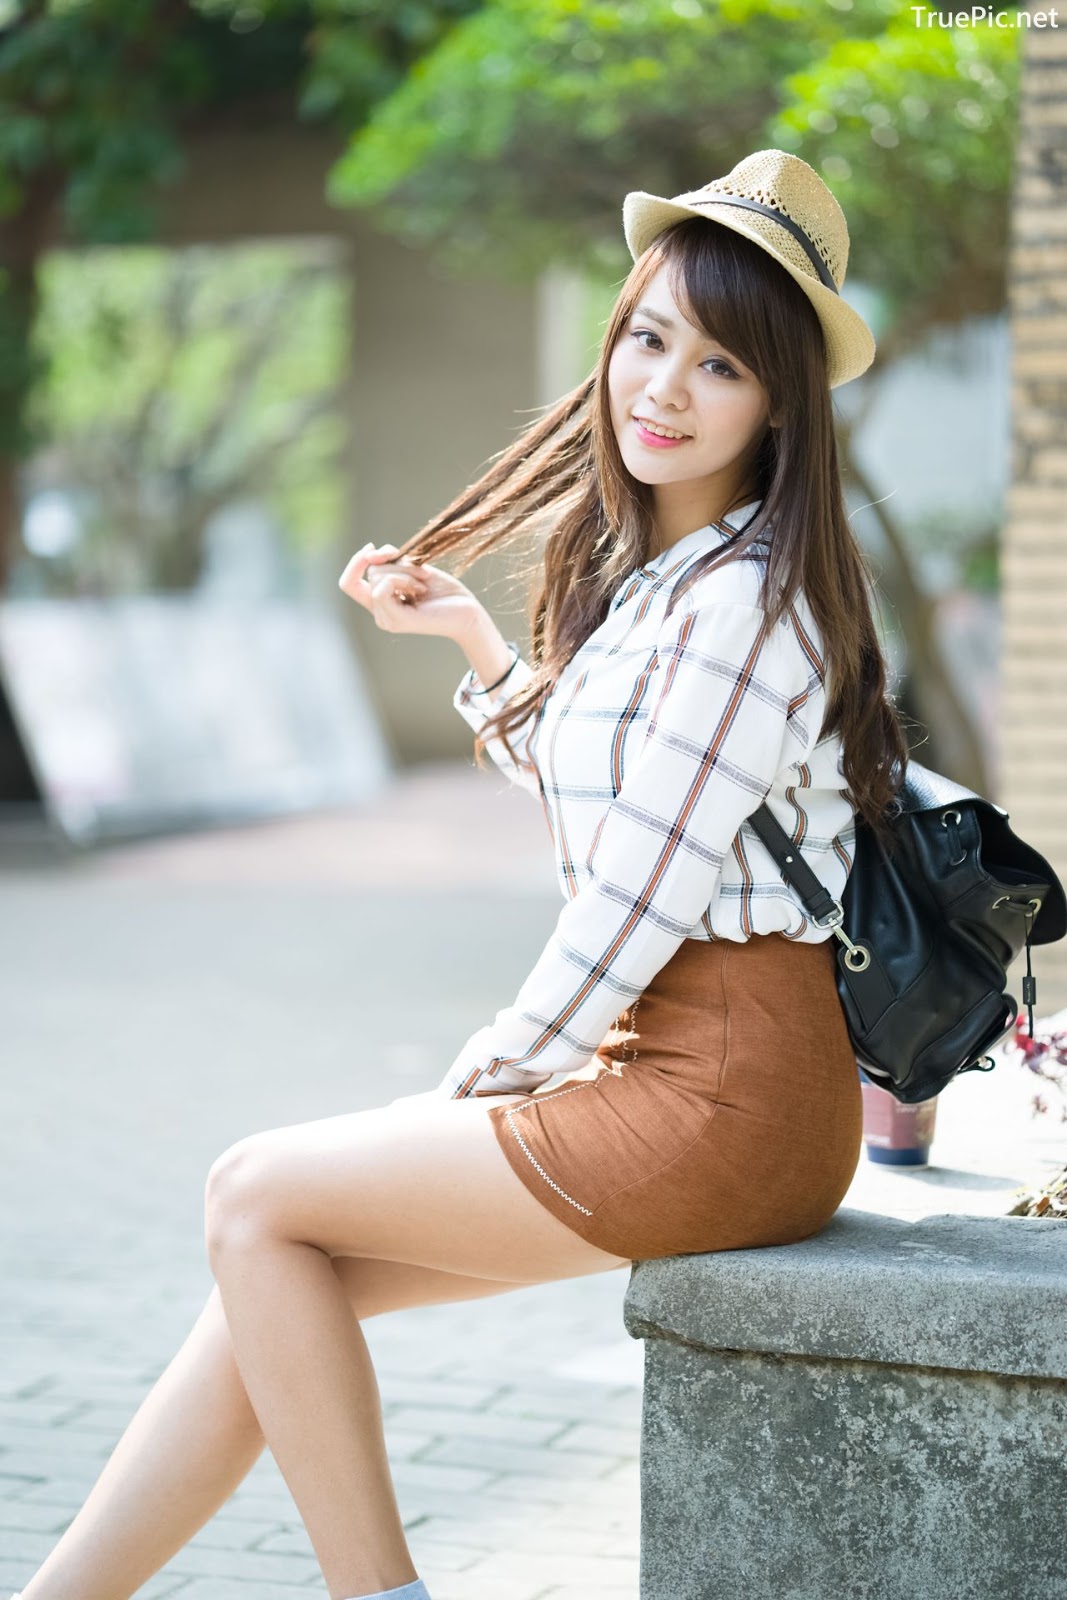 Image-Taiwan-Social-Celebrity-Sun-Hui-Tong-孫卉彤-A-Day-as-Student-Girl-TruePic.net- Picture-35